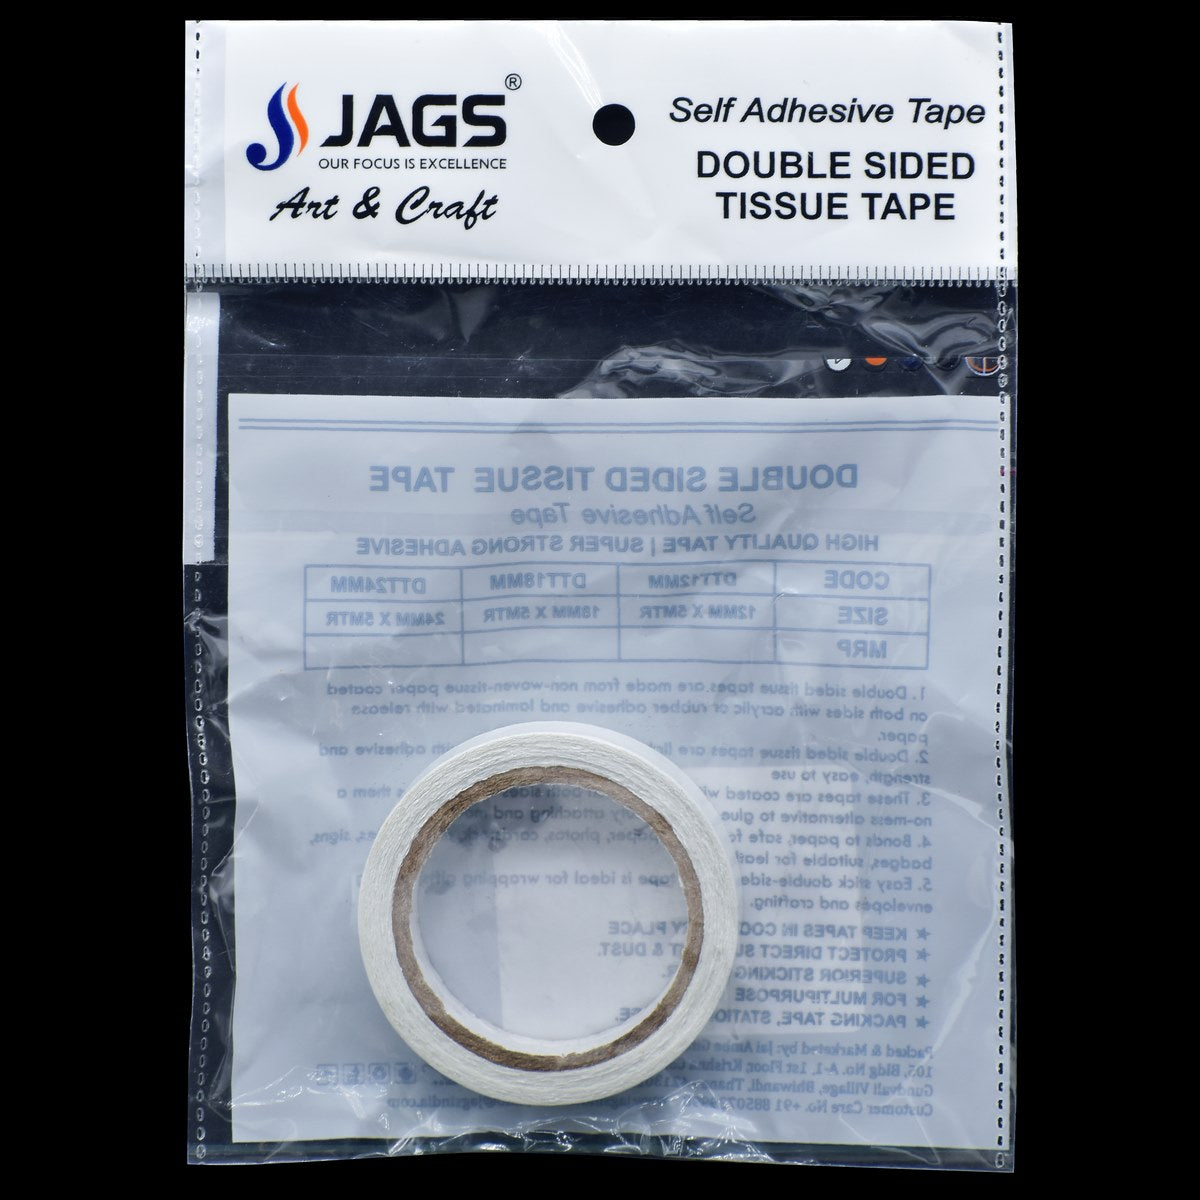 jags-mumbai Two way tape Double Sided Tissue Tape